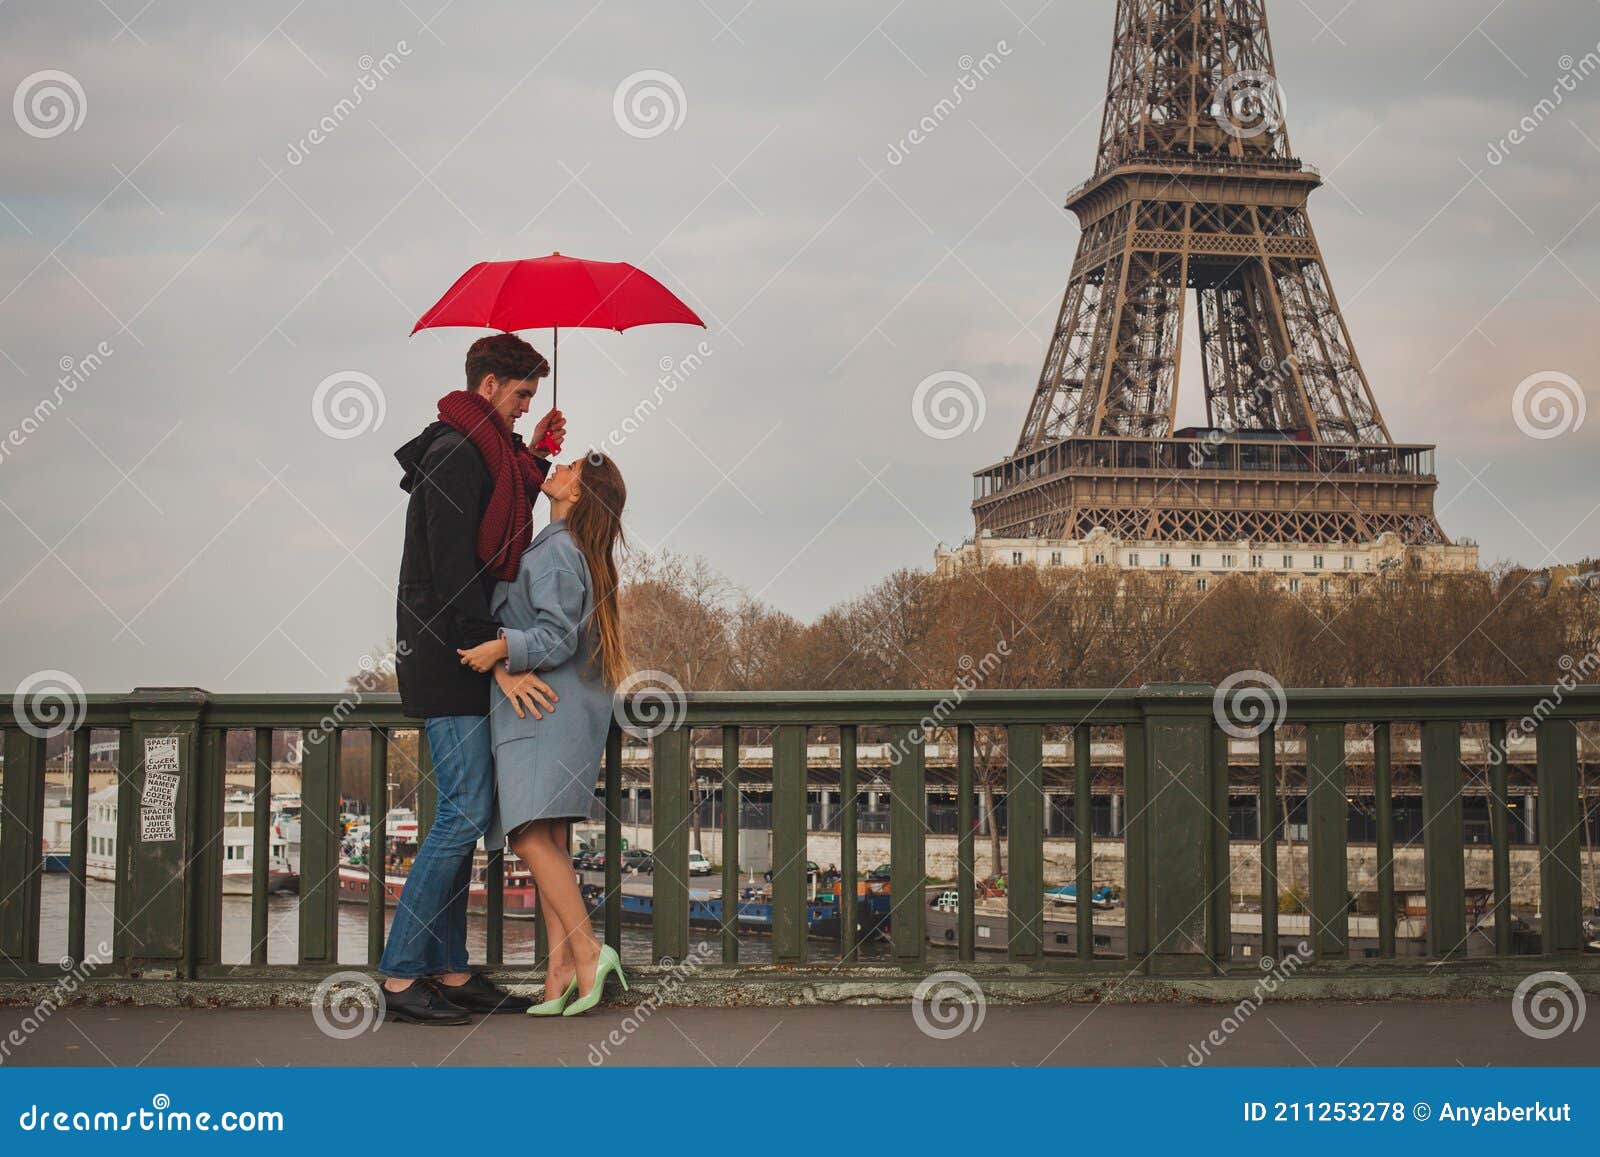 Couple in Paris Near Eiffel Tower in Autumn, Dating, Man and Woman Kissing  Under Umbrella Stock Photo - Image of relationships, rain: 211253278